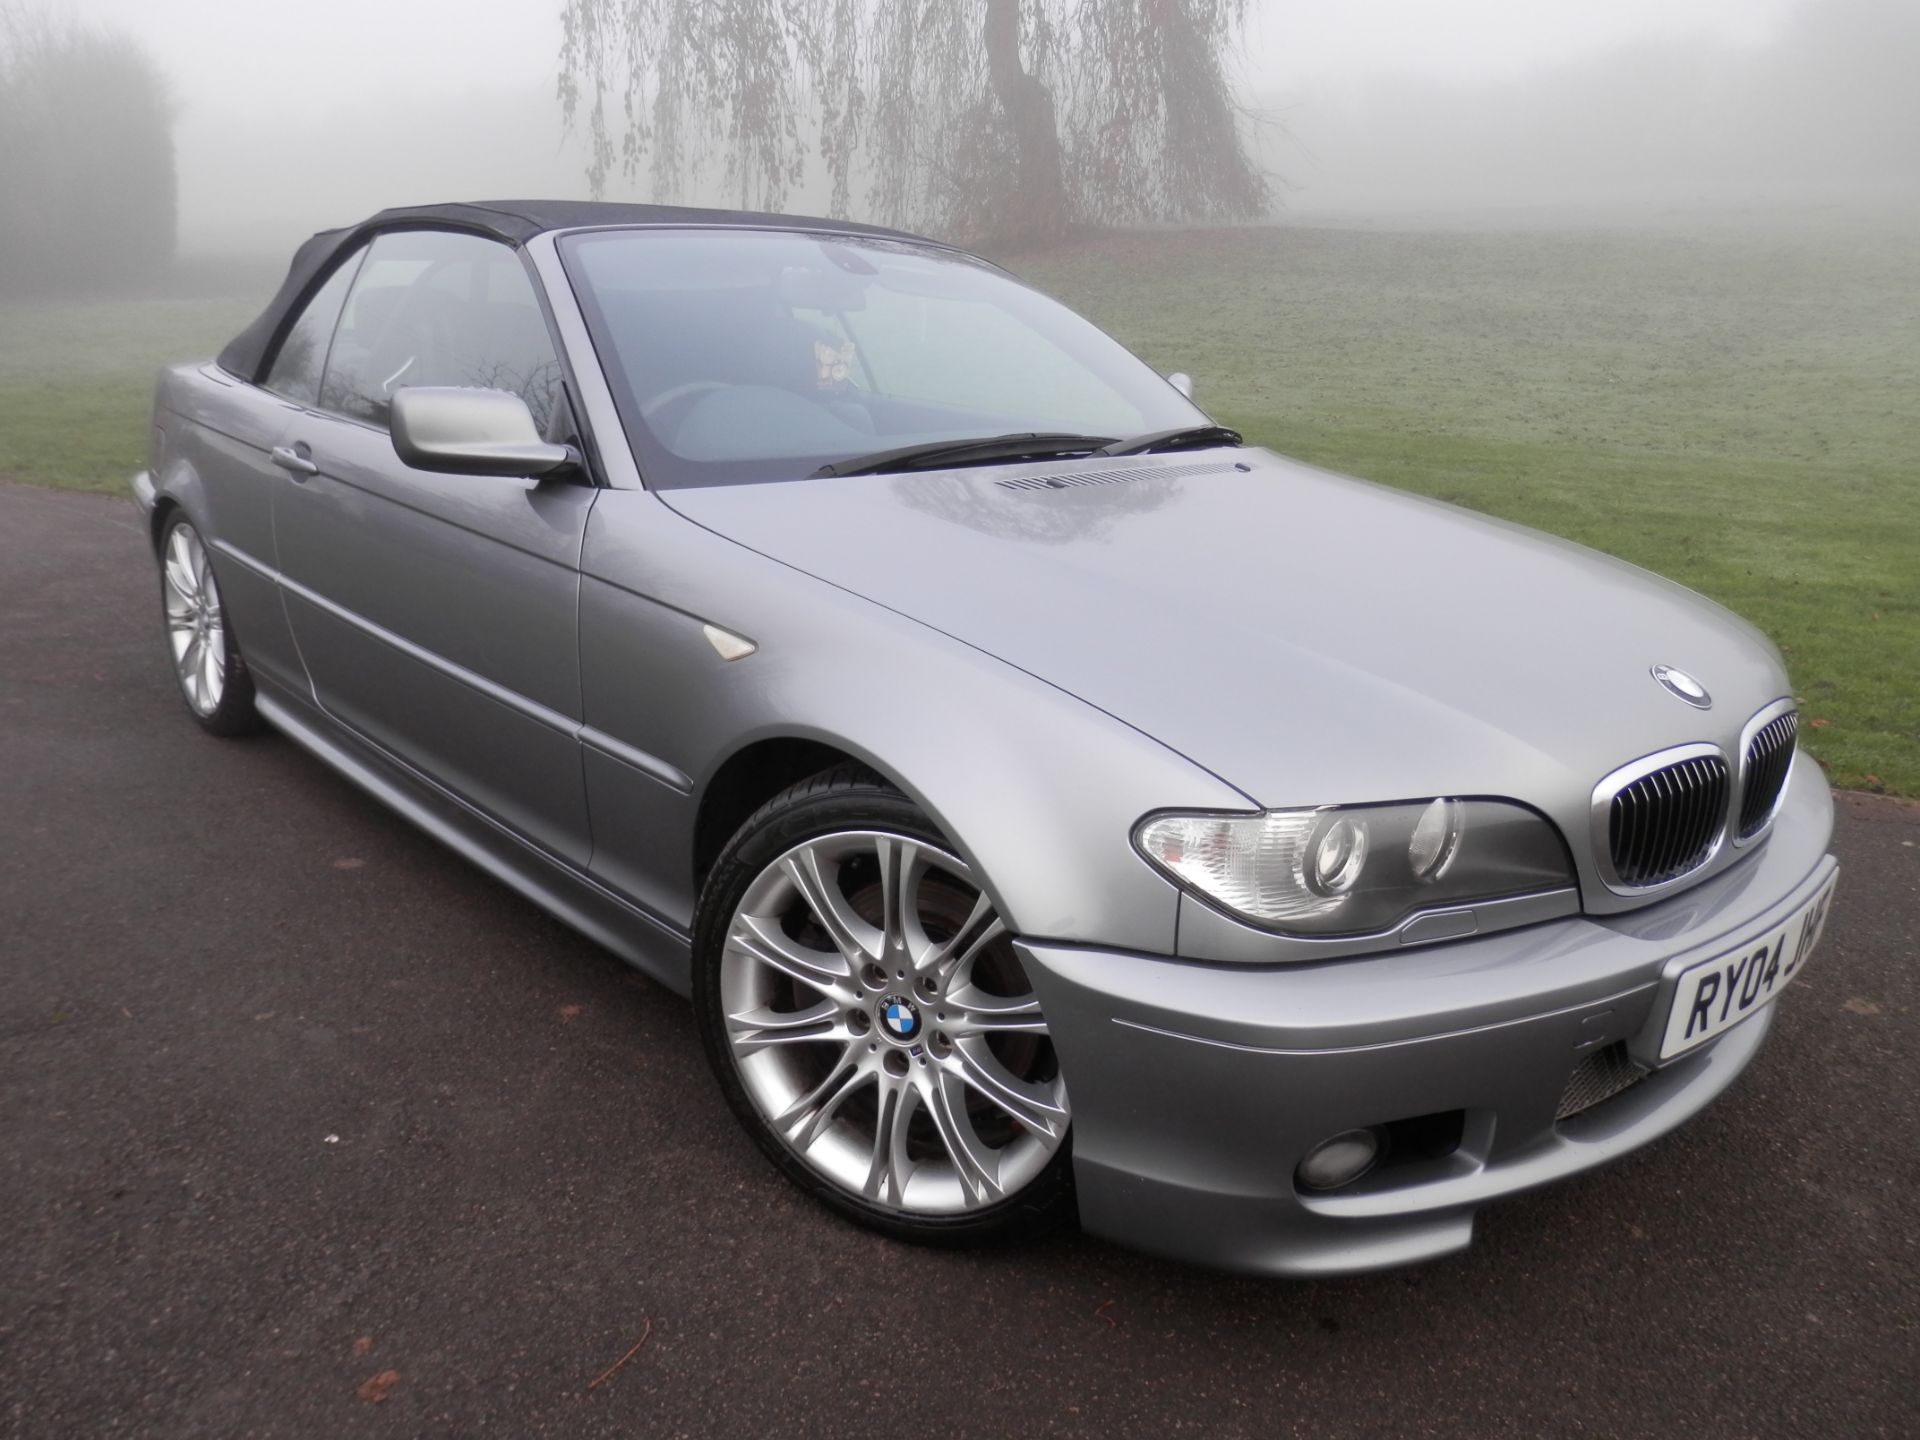 2004/04 BMW 330 CI M-SPORT COUPE SPORTS AUTO CONVERTIBLE, SILVER WITH BLACK LEATHER, ONLY 69K MILES.